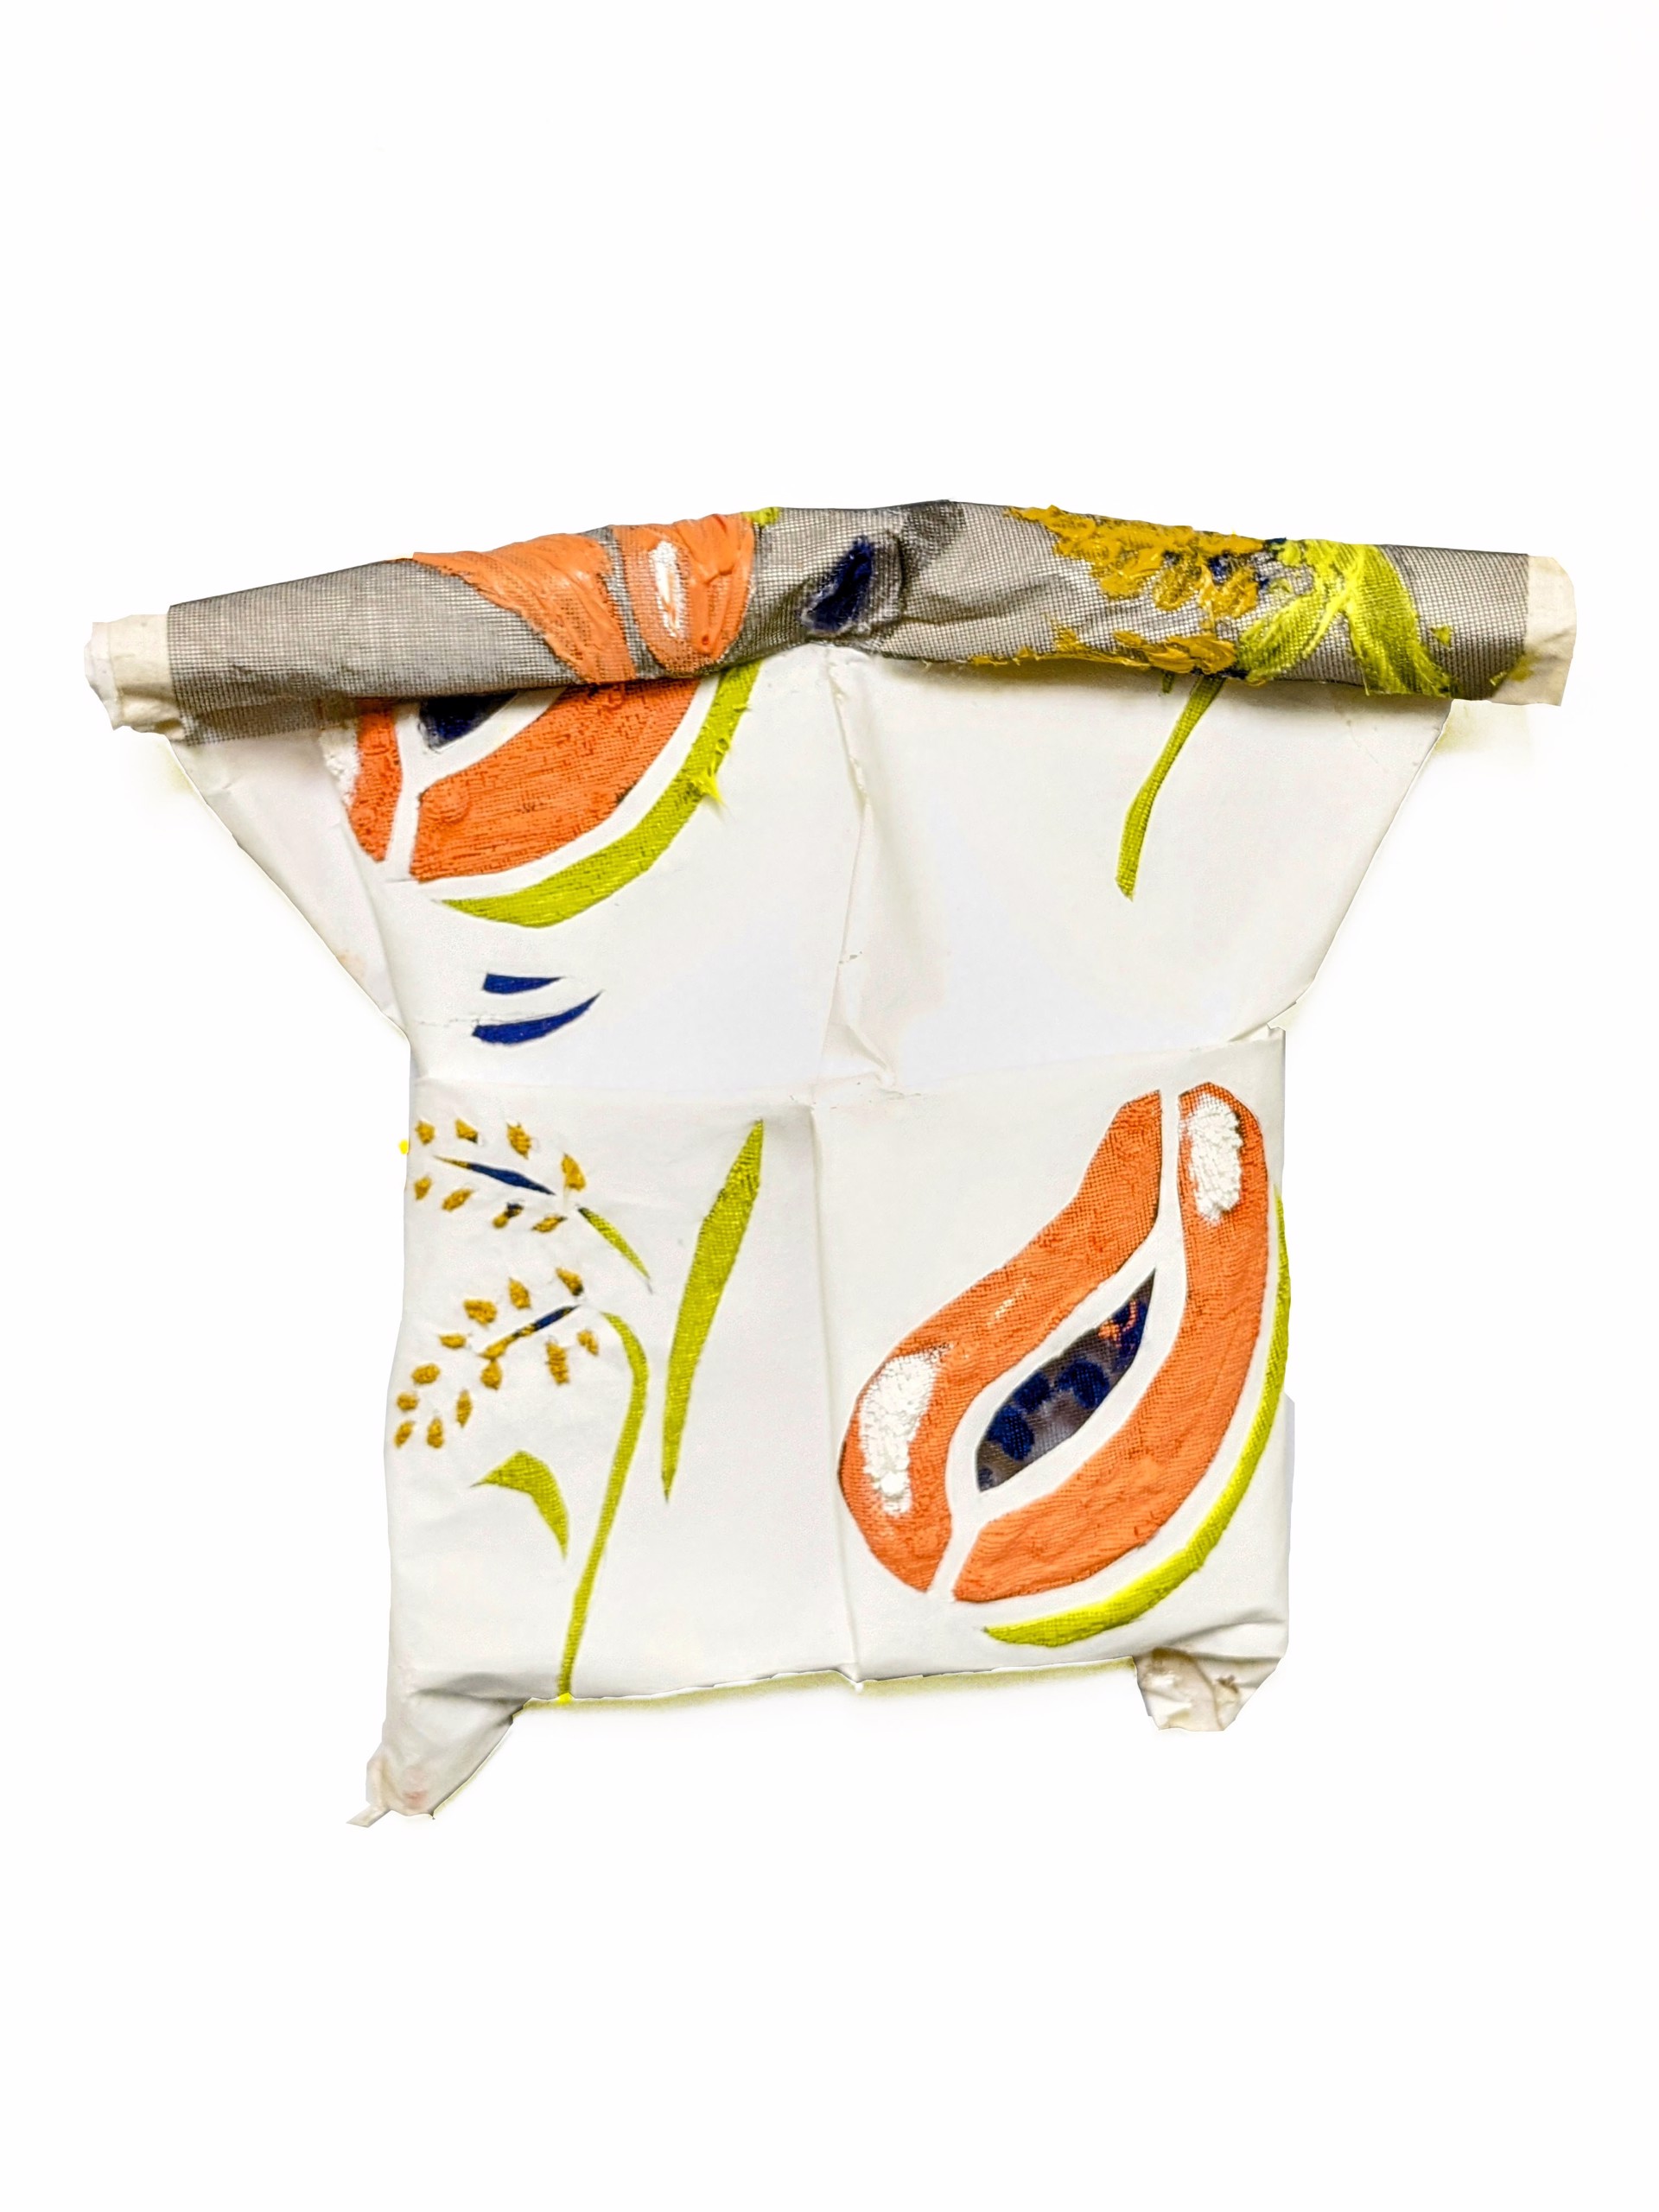 Small Rolled Canvas Bag with Papaya and Wheat by Eleanor Aldrich